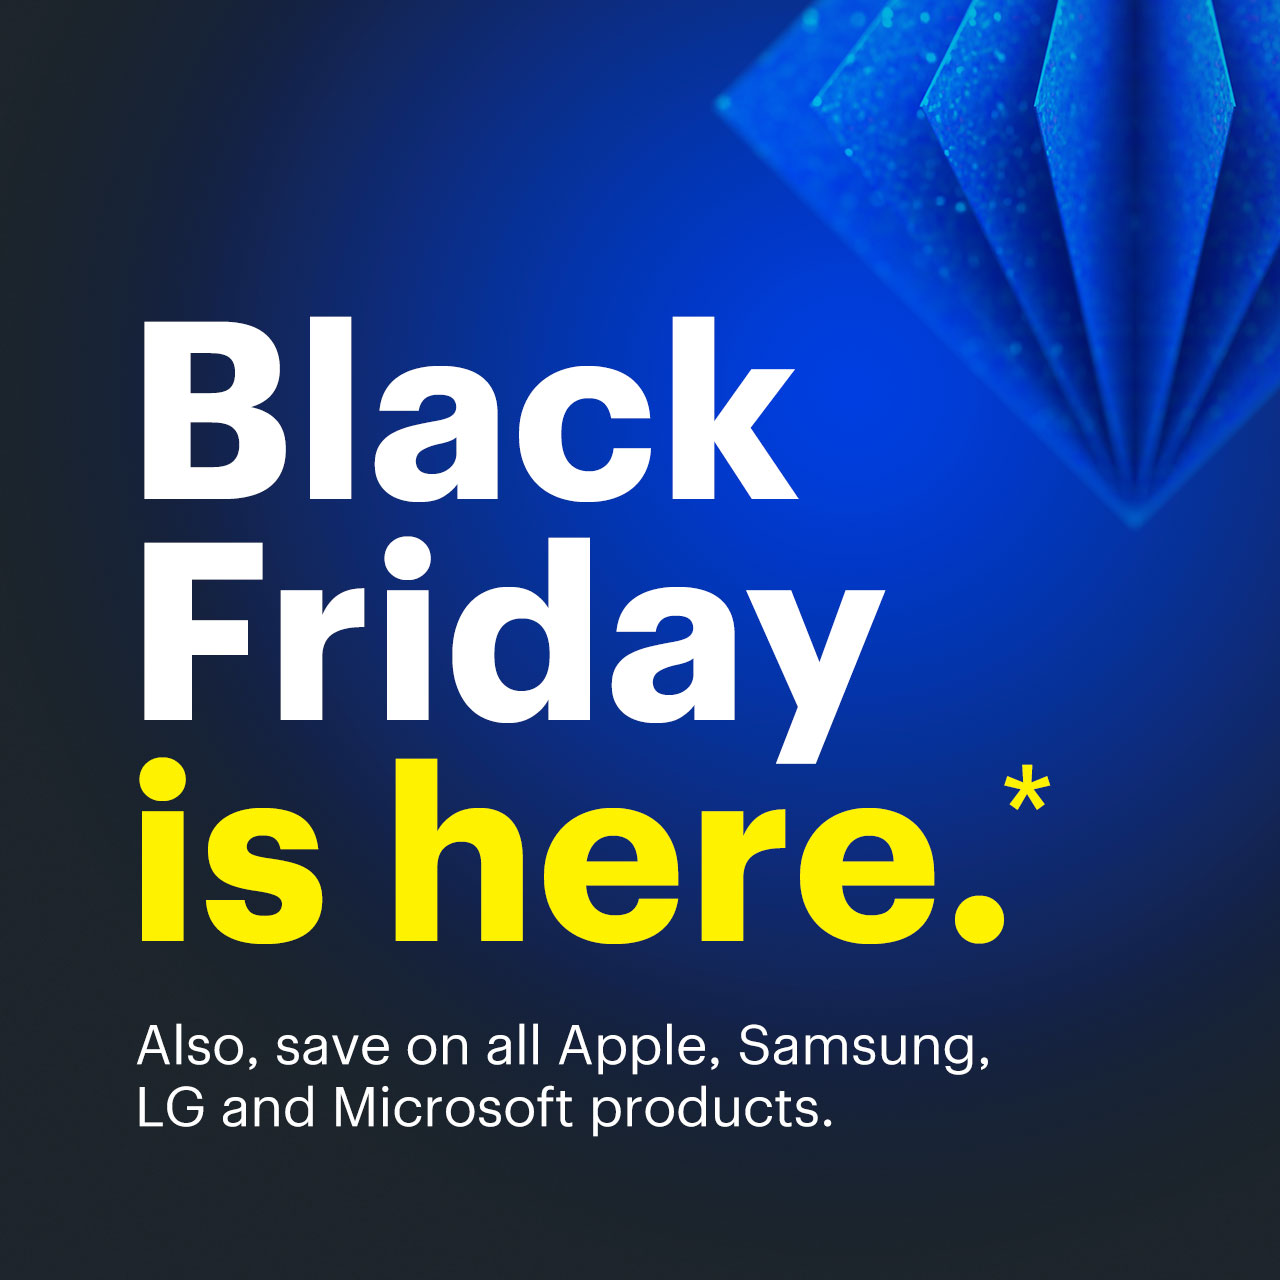 Black Friday is here. Also, save on all Apple, Samsung, LG and Microsoft products. Reference disclaimer.